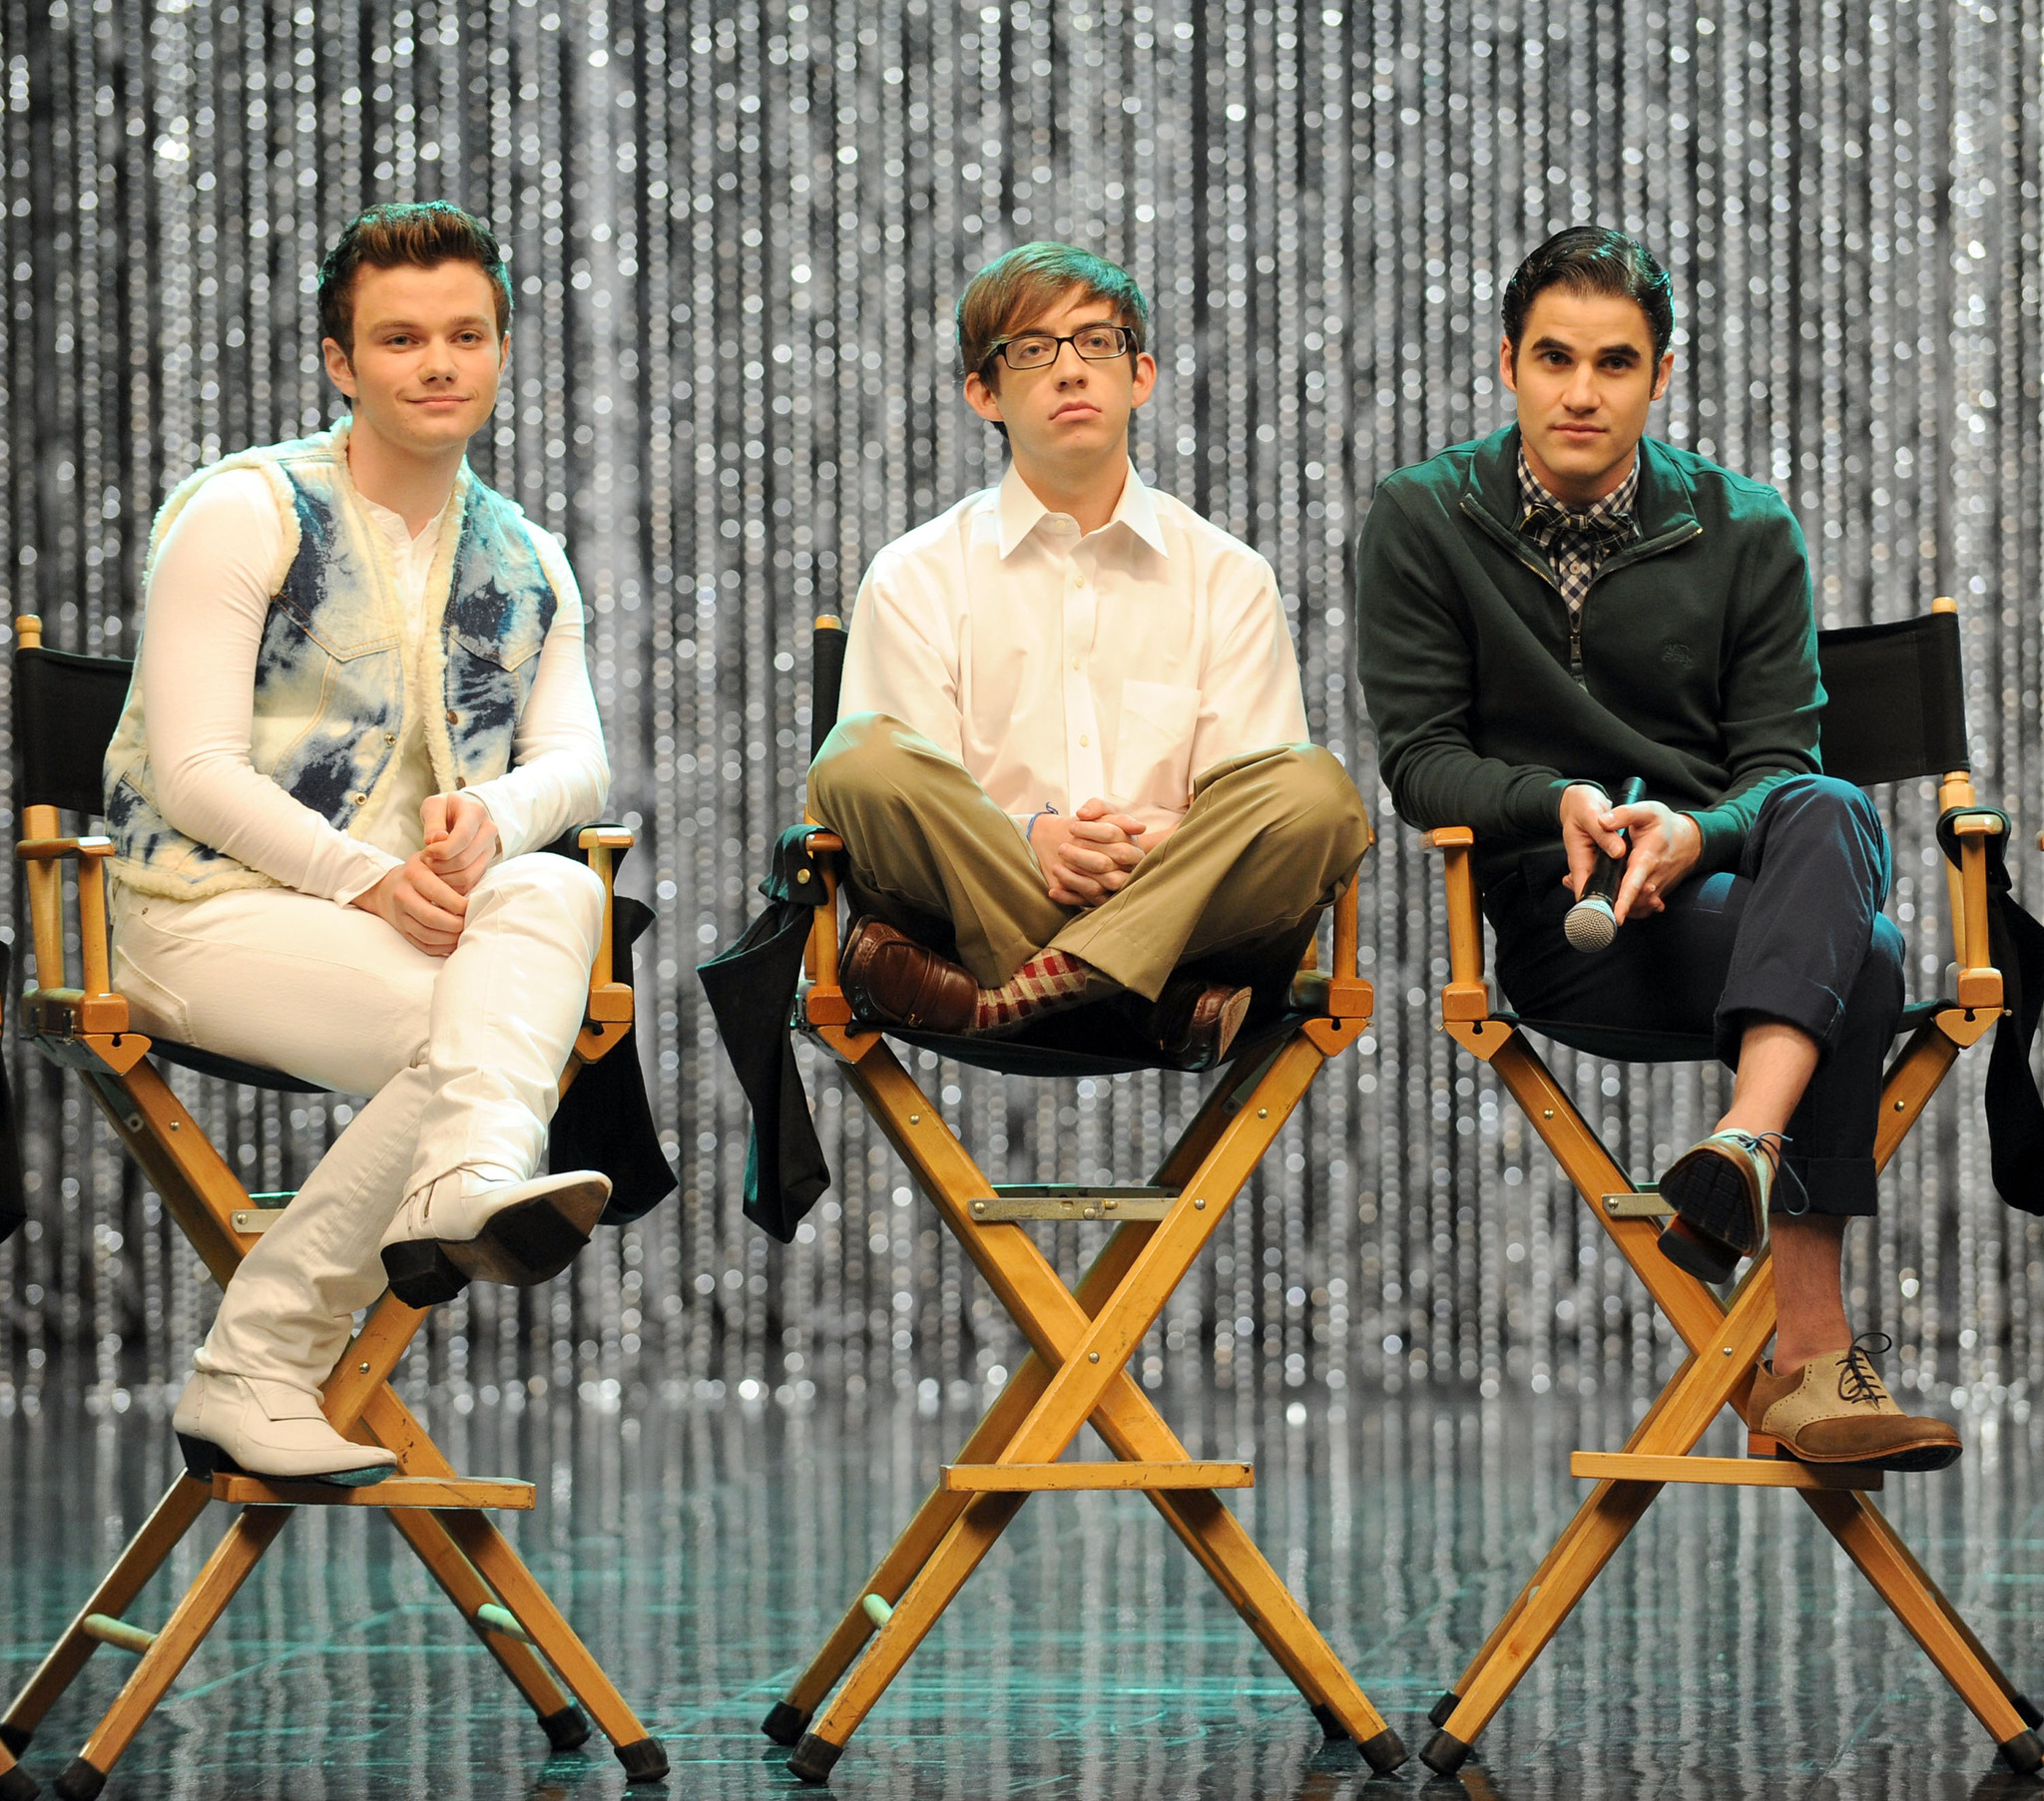 Darren Criss, Kevin McHale and Chris Colfer at event of Glee (2009)